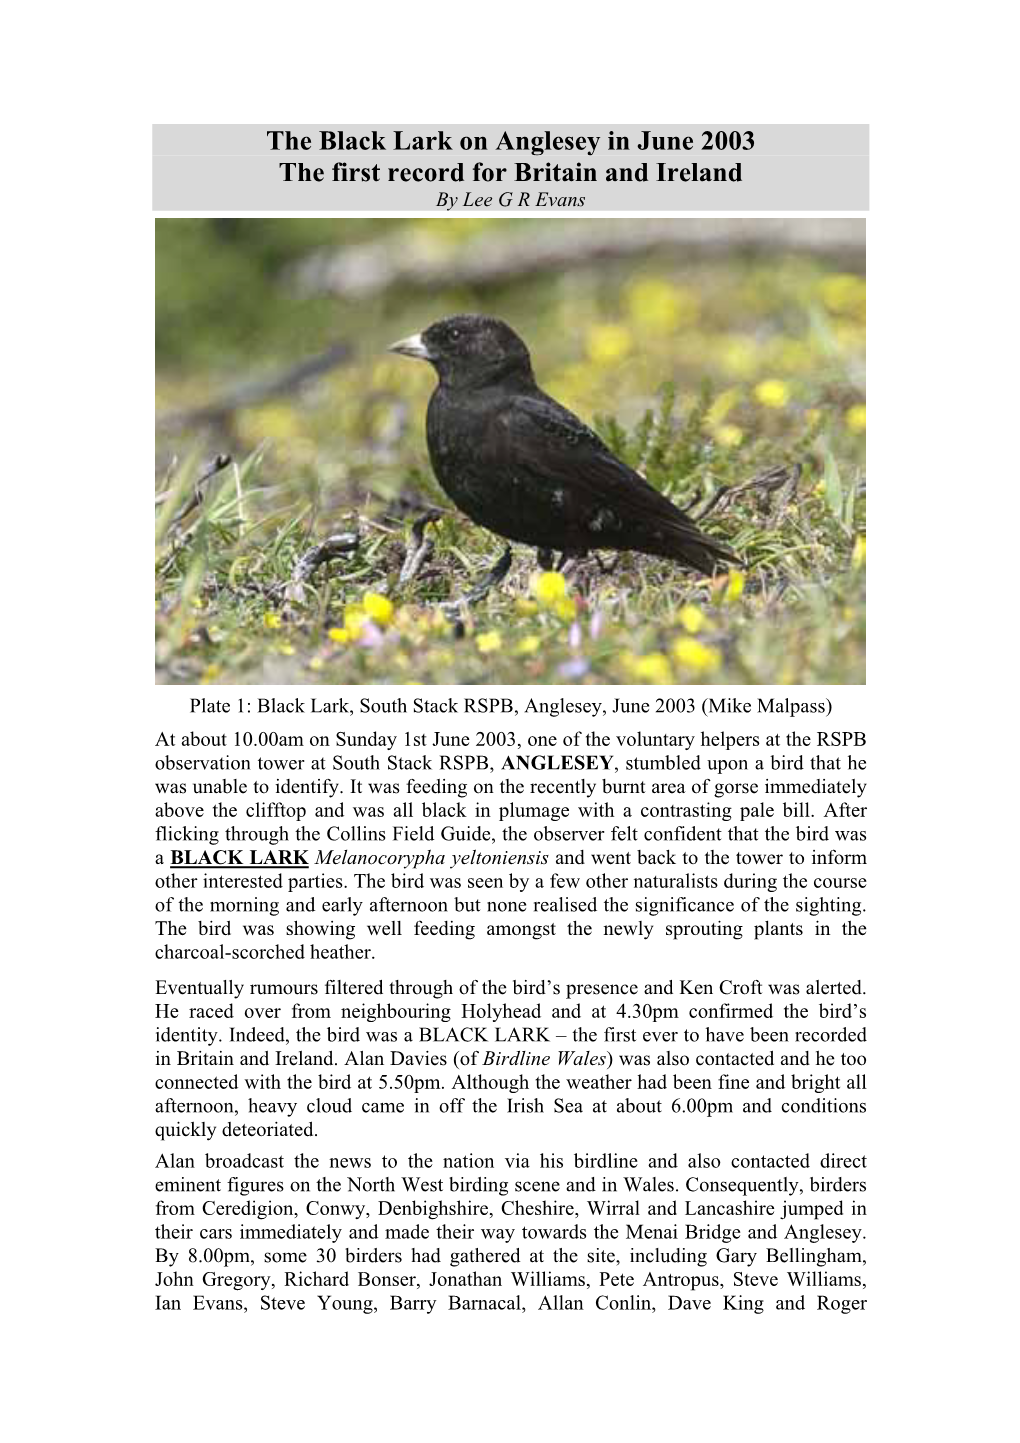 The Black Lark on Anglesey in June 2003 the First Record for Britain and Ireland by Lee G R Evans